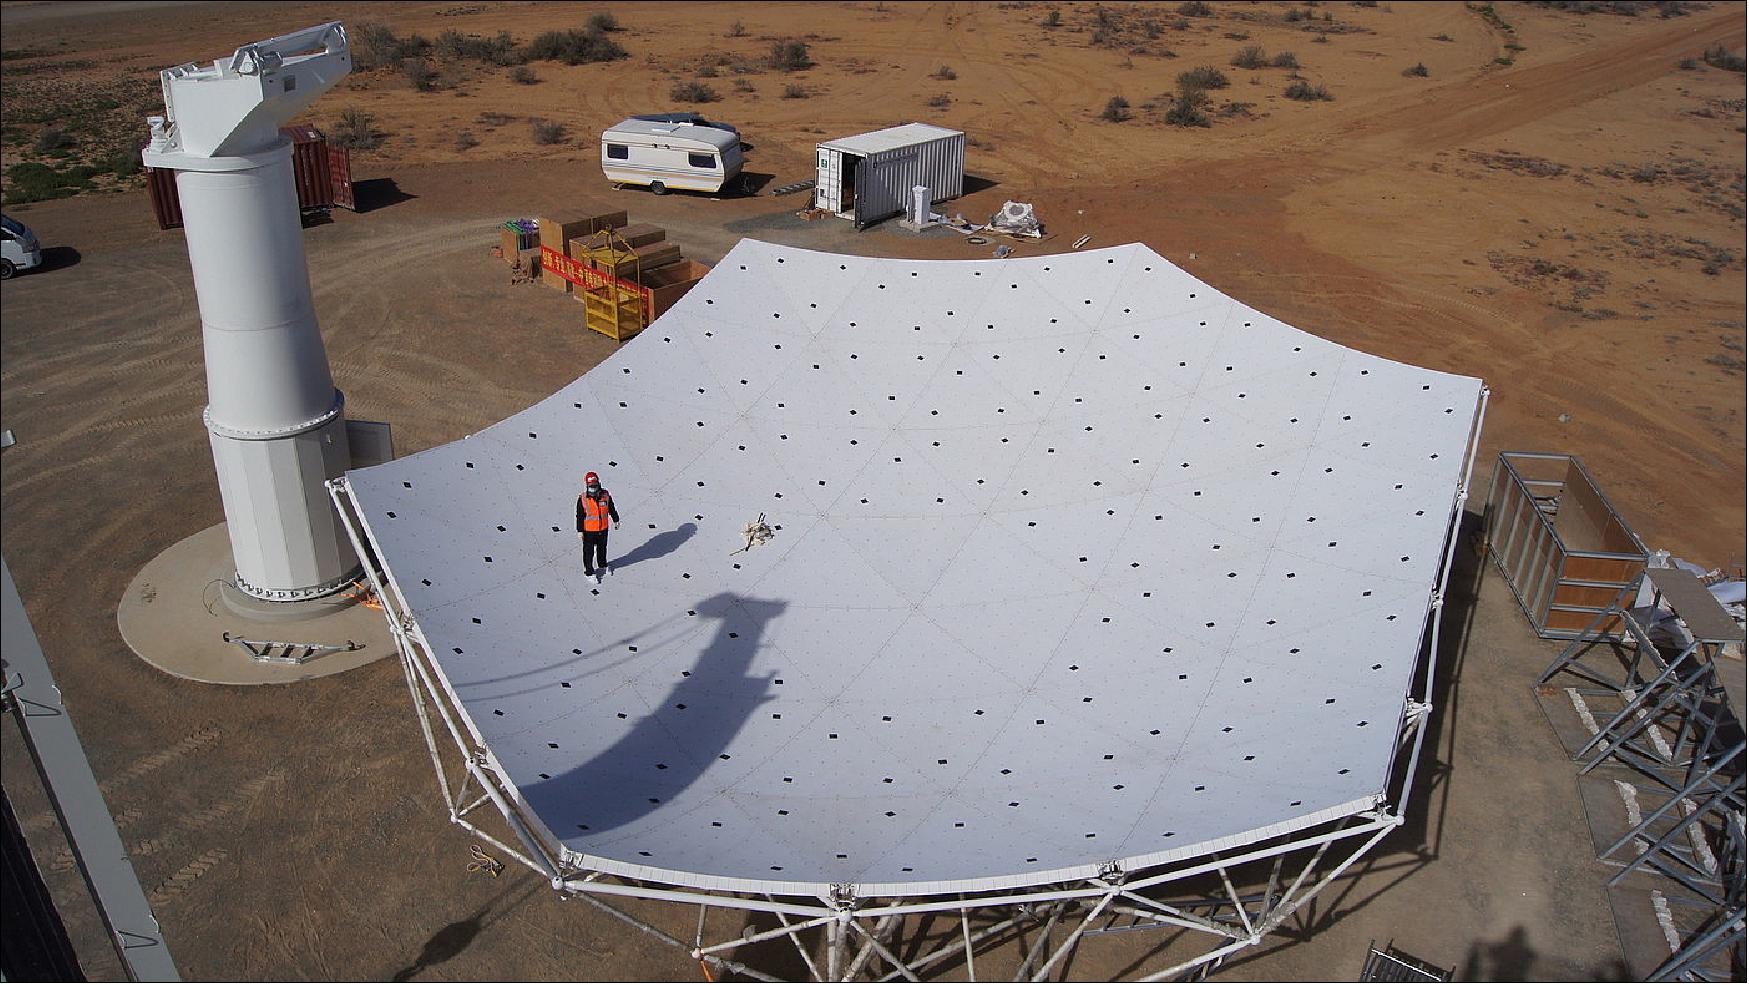 Figure 23: The Max Planck Society has funded a second SKA prototype dish, SKA-MPI, currently being constructed on site in South Africa, bringing together Chinese, Italian and German components [image credit: SARAO (South African Radio Astronomy Observatory)]